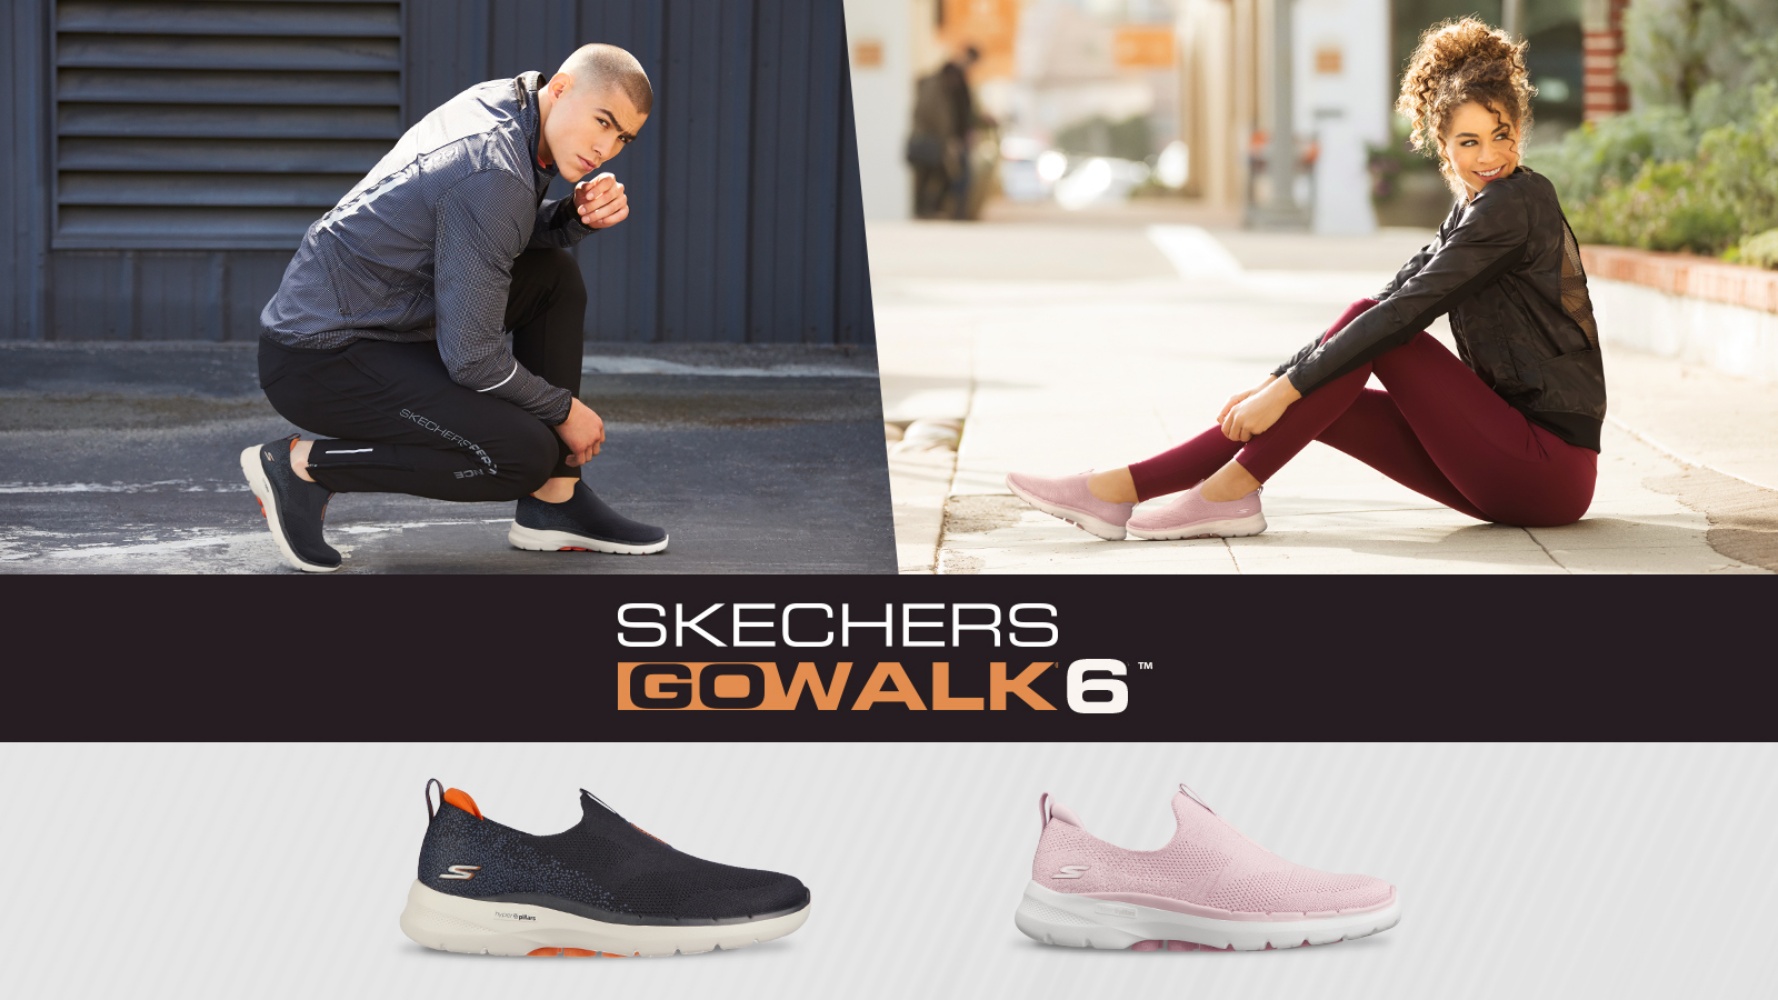 BZ-Skechers-hinh-anh-1